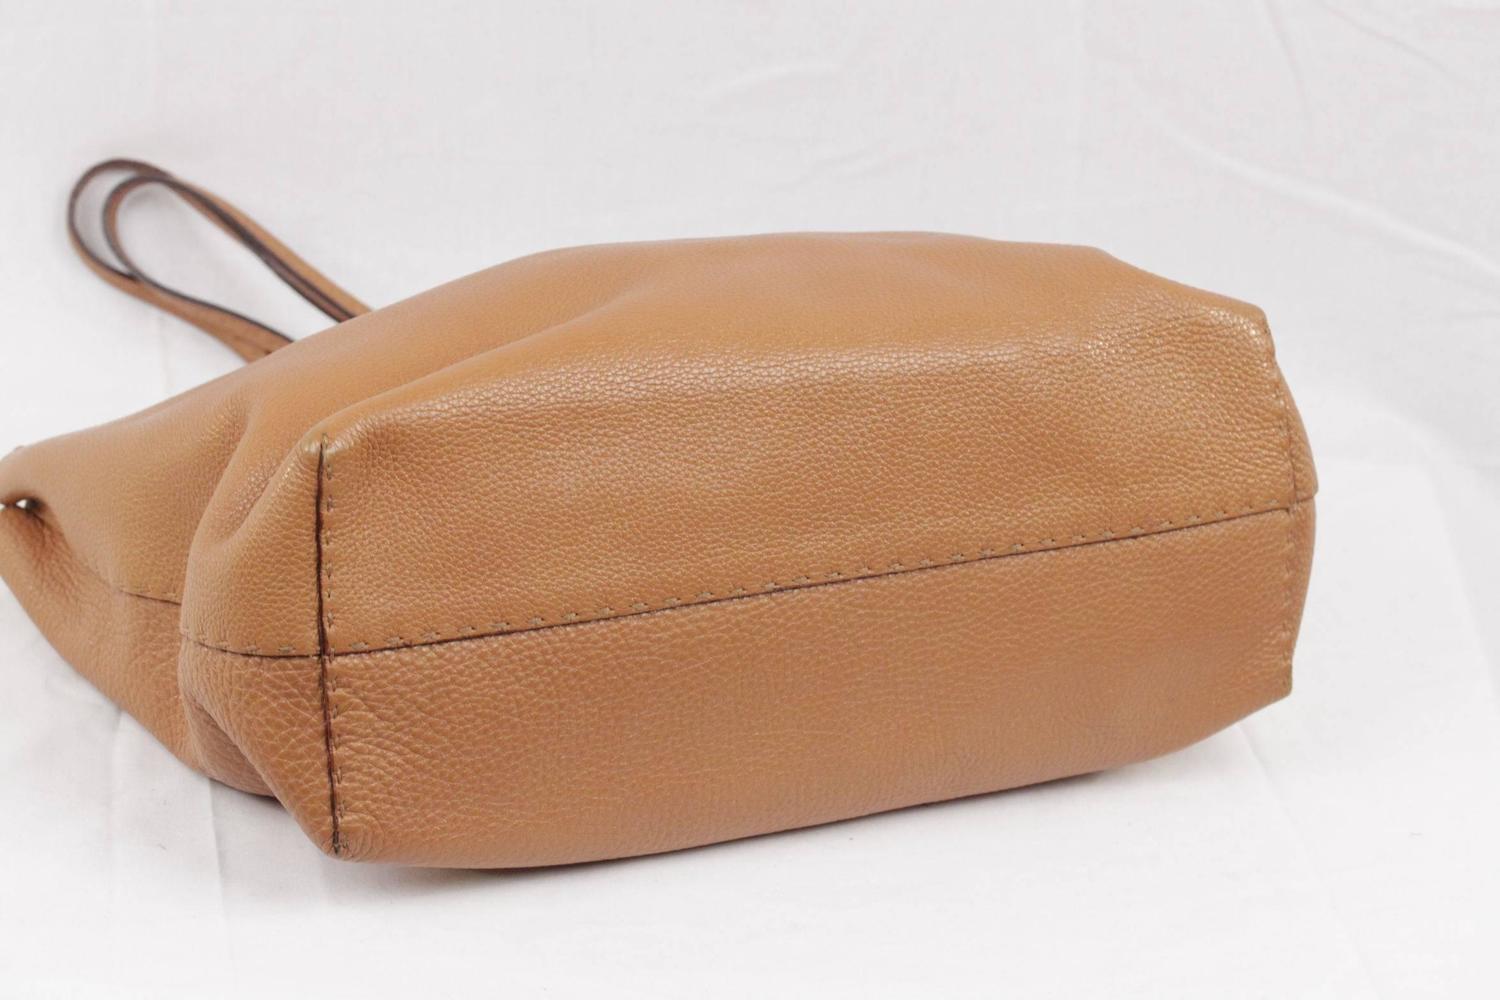 FENDI SELLERIA Tan Leather TOTE Shoulder Bag SHOPPING Limited Edition For Sale at 1stdibs